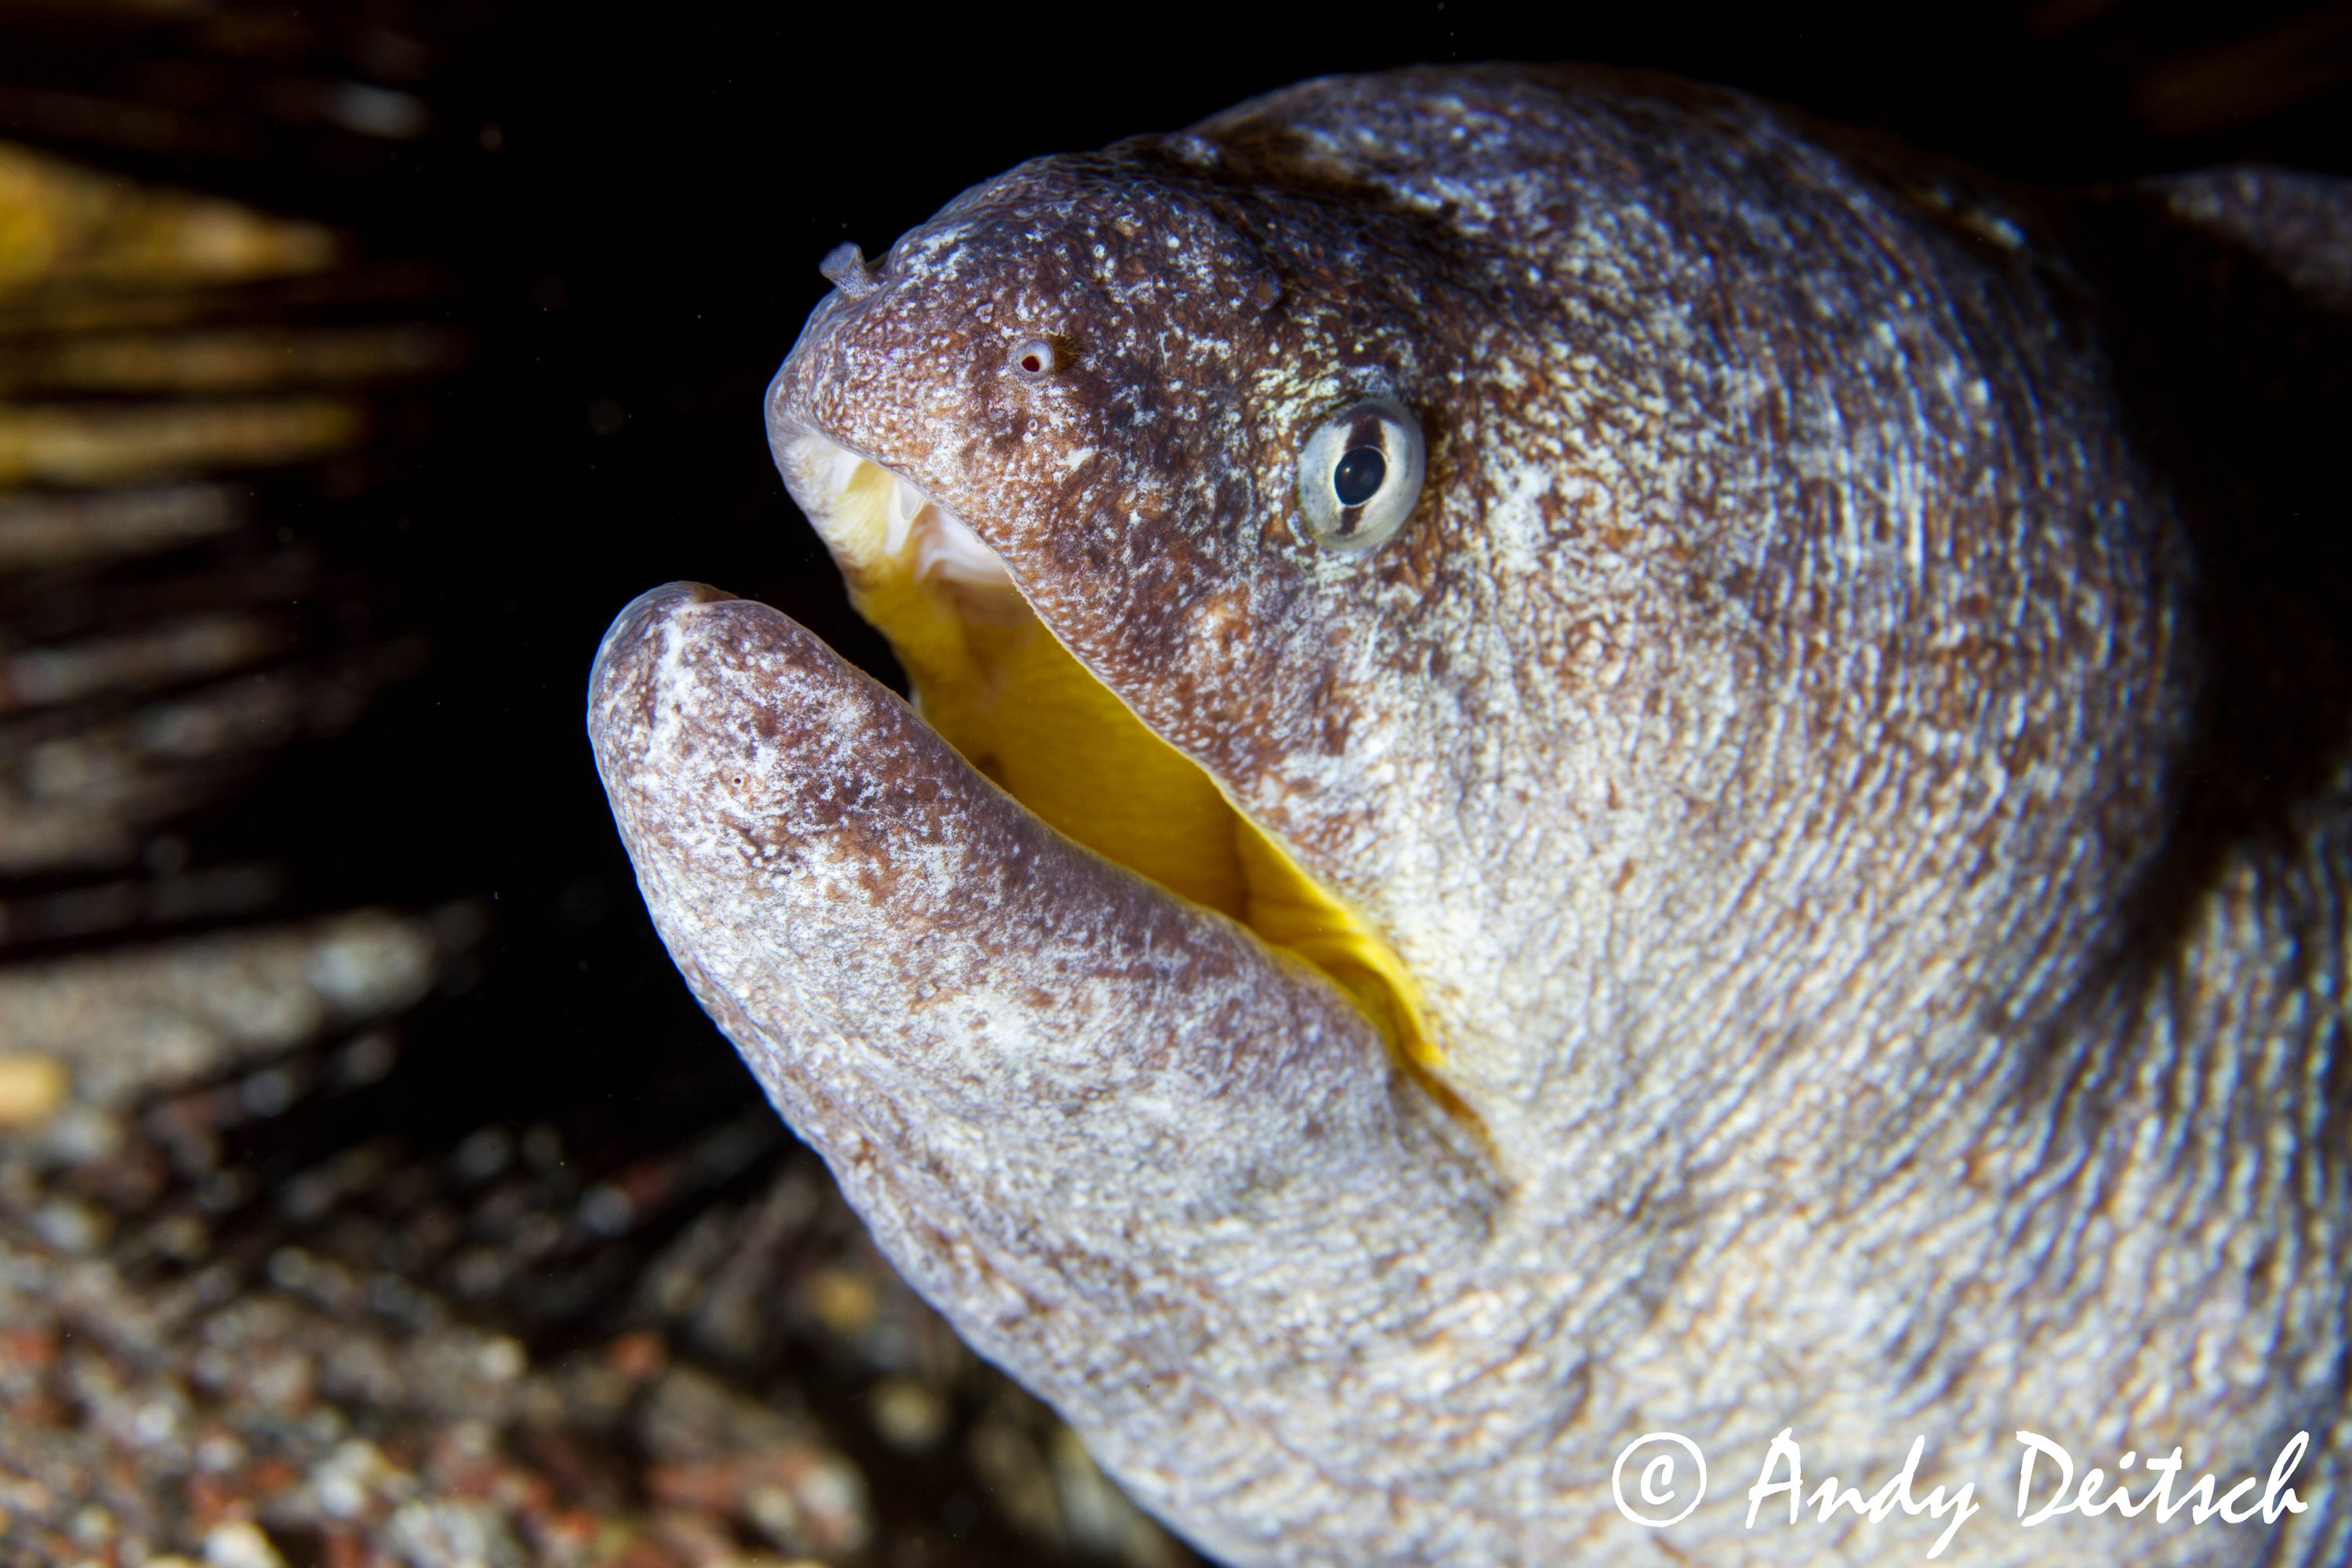 Yellow Mouthed Moray